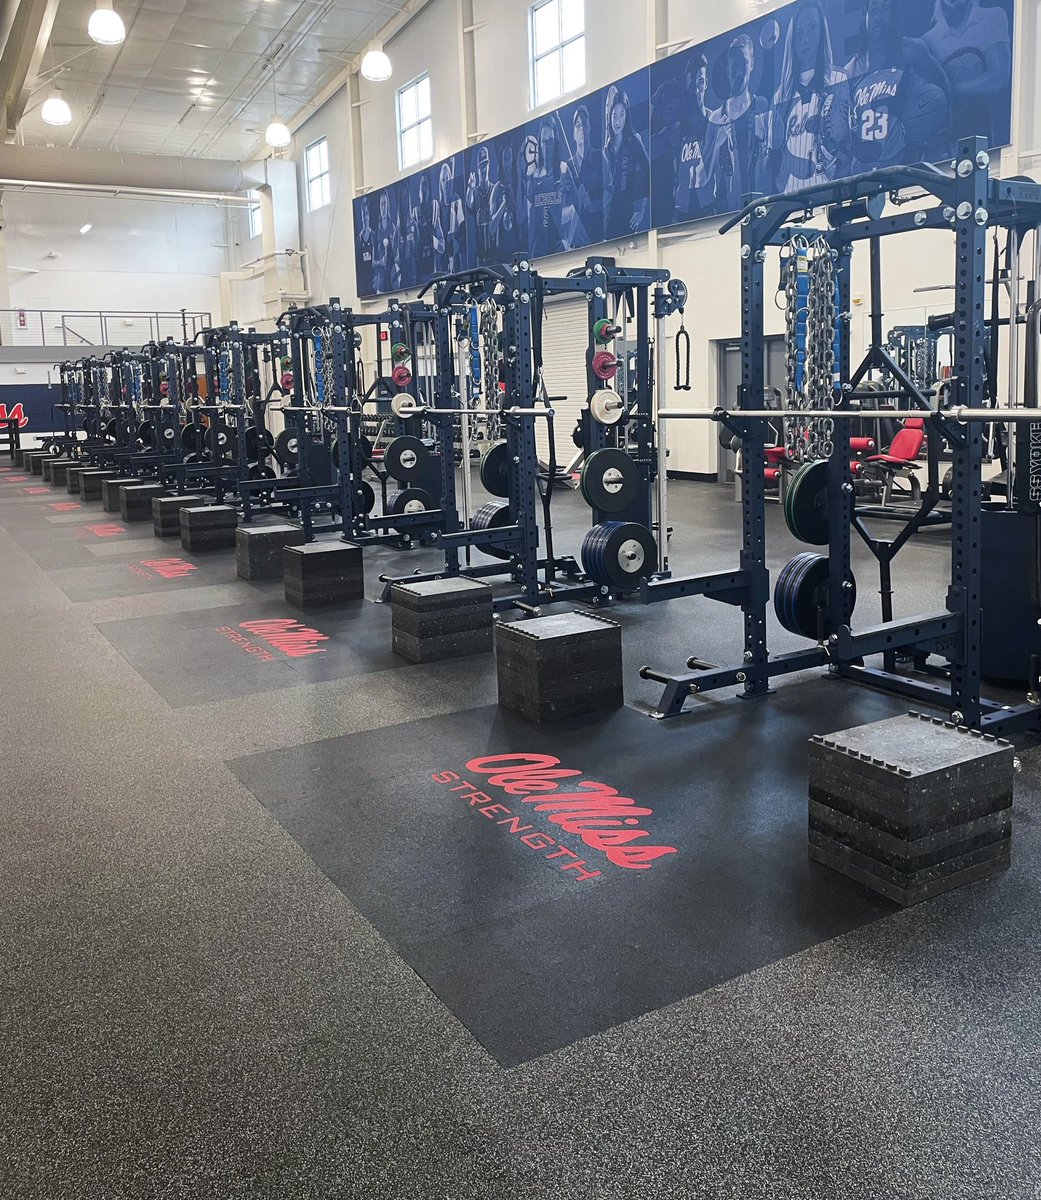 📌𝙊𝙡𝙚 𝙈𝙞𝙨𝙨 ⌕ Gillom Center Weight Room💪 » 8’ Collegiate Series Half Racks » Storage + Attachments » Mounted Adjustable Cable Columns » Multi Angle DB Benches » Fixed Pad Glute Ham Benches #olemiss #WeightRoomWednesday #PowerLiftProud #PowerLiftBuilt